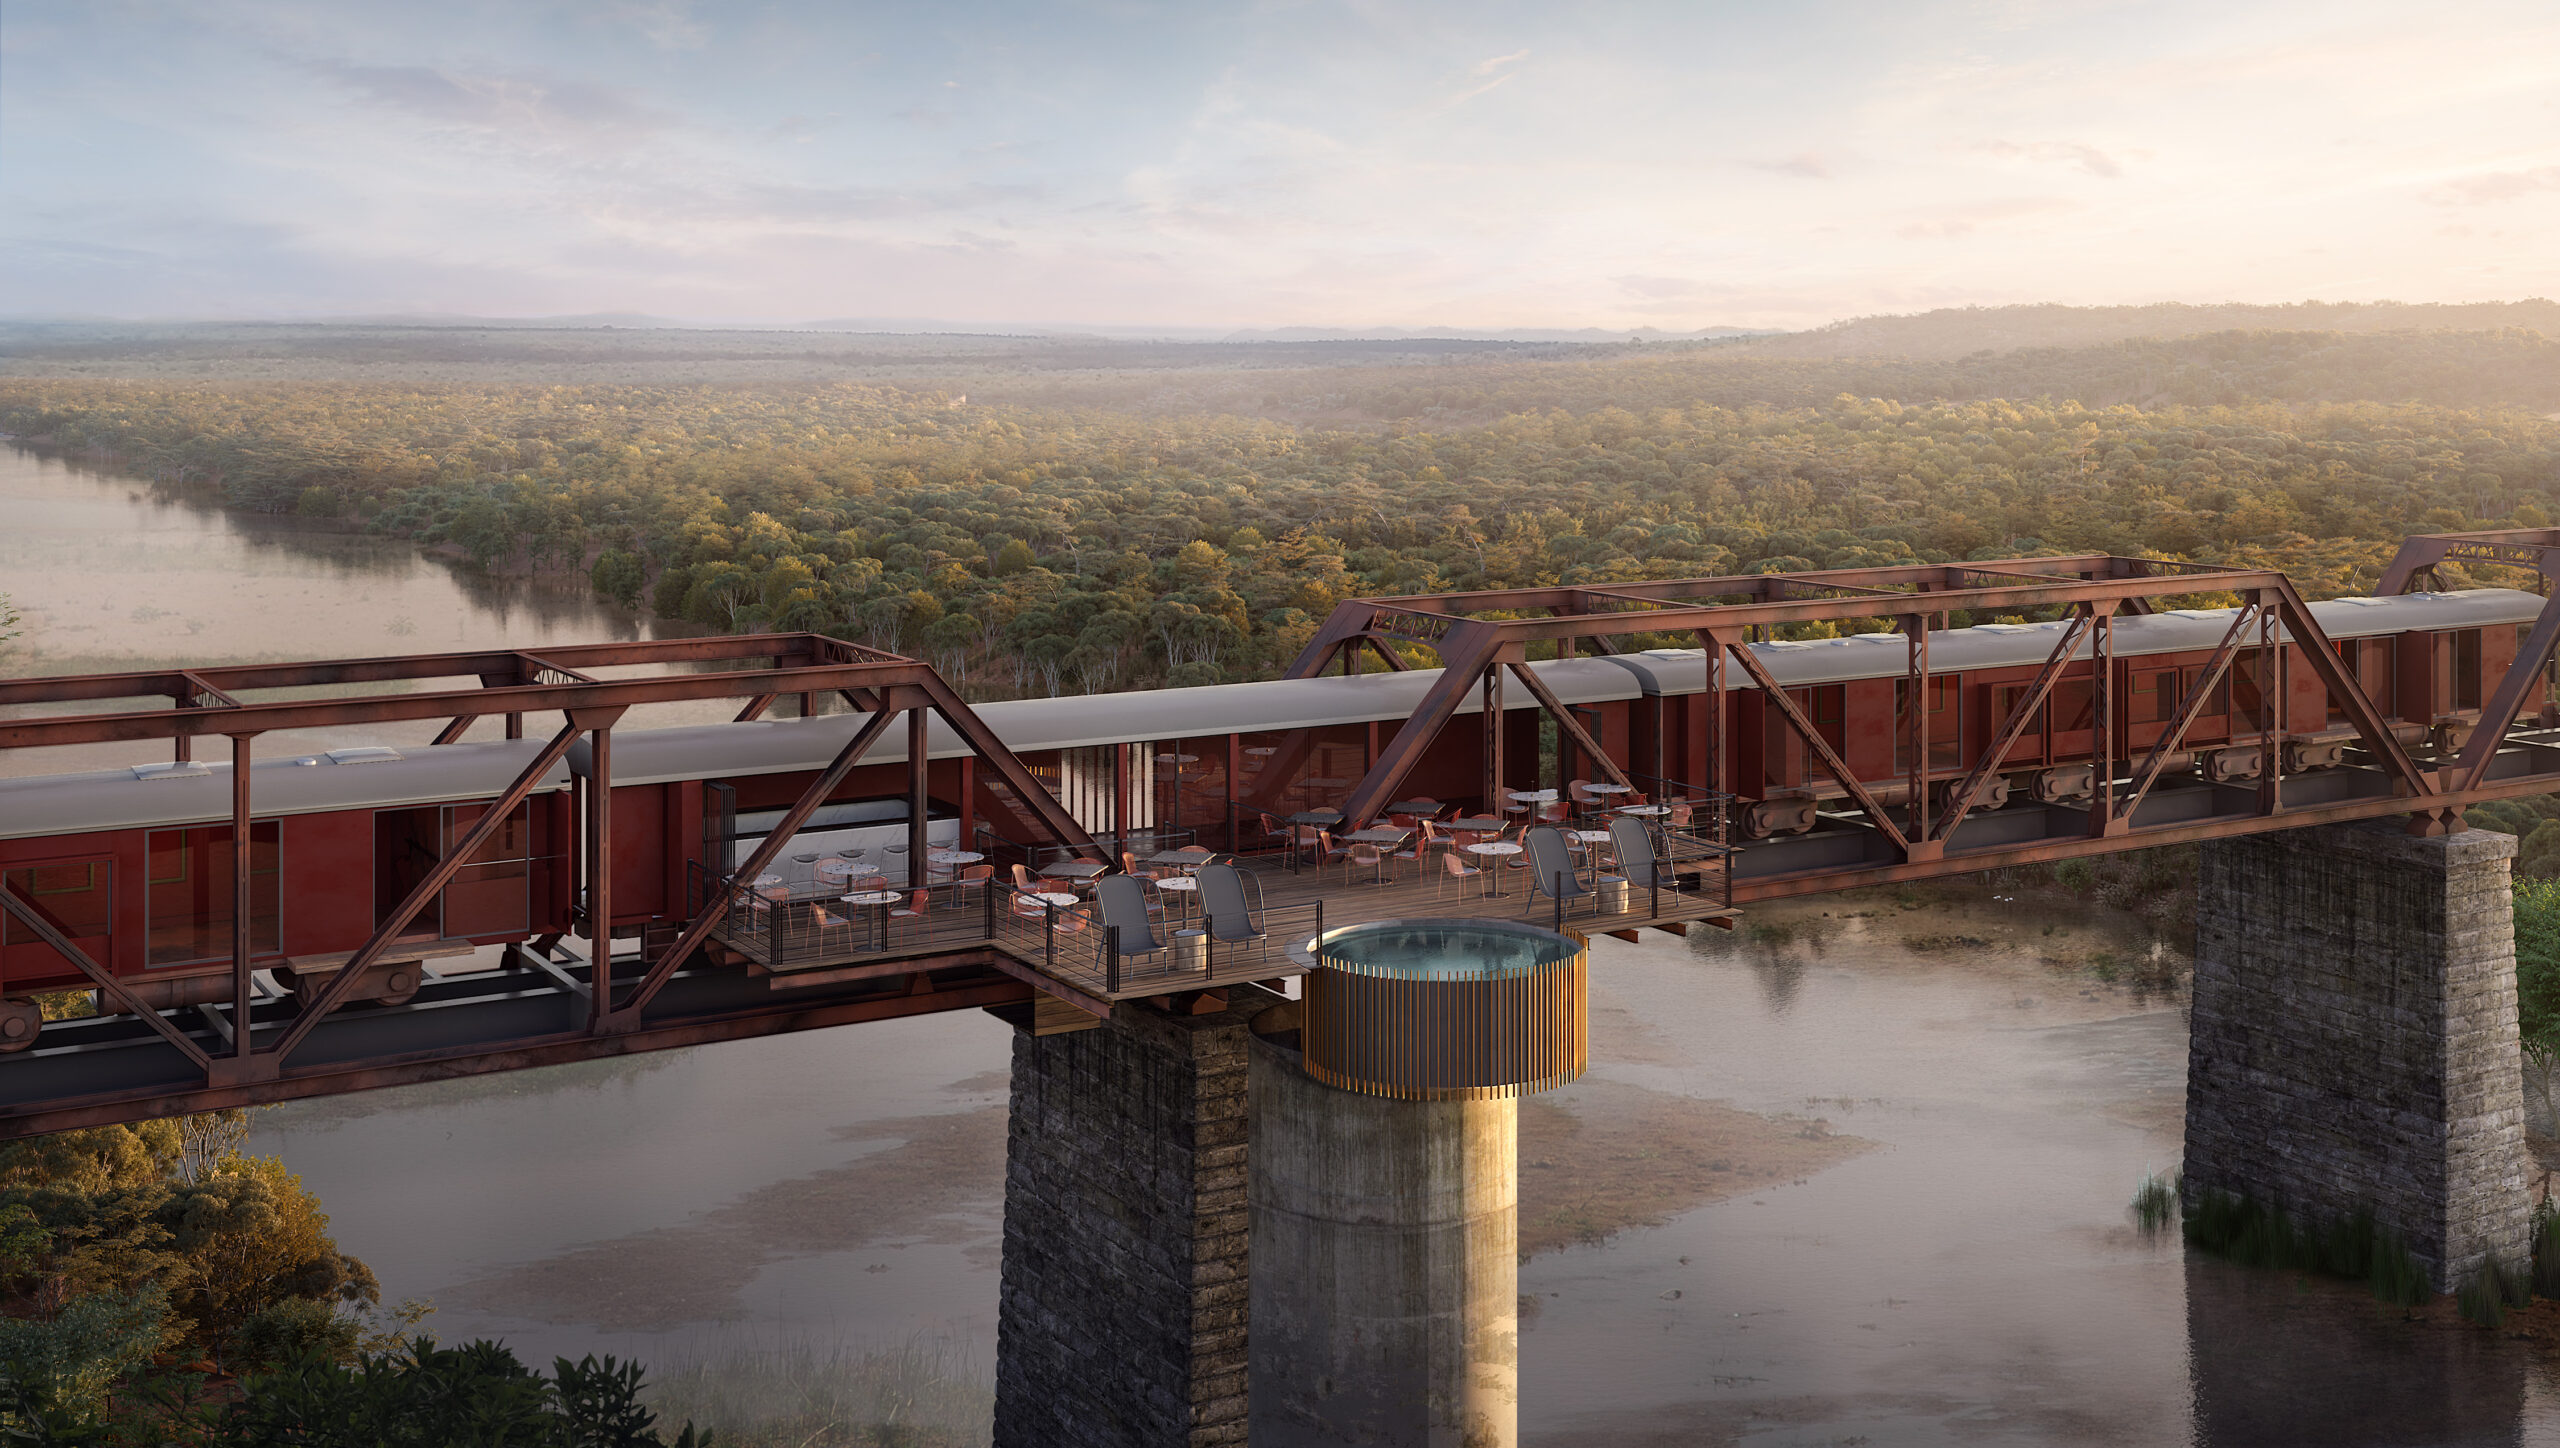 Kruger Shalati Train on a Bridge to open as luxury hotel in South Africa